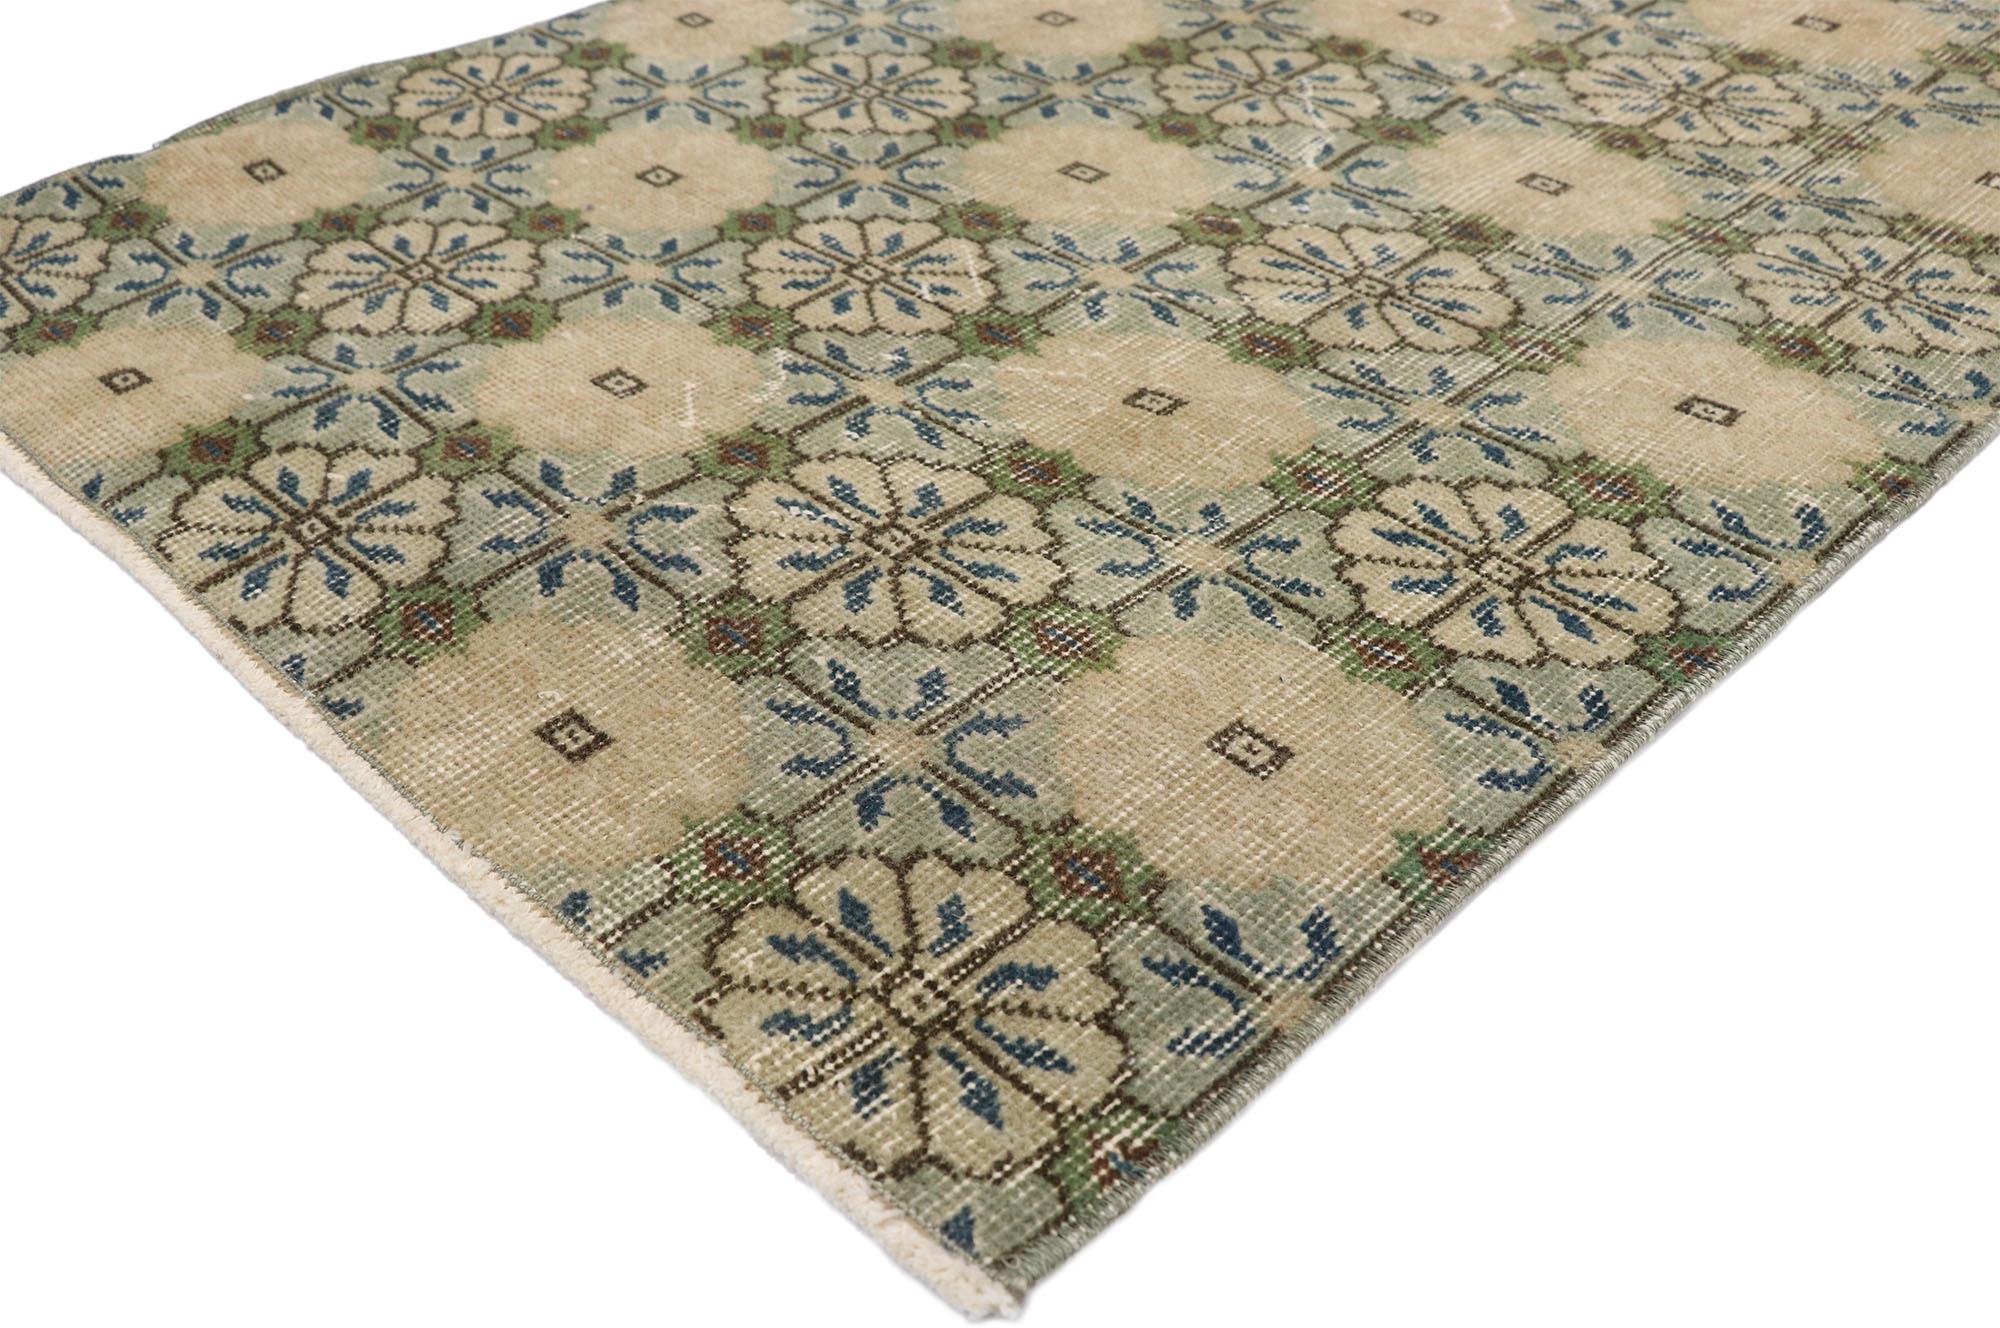 52597 Zeki Muren distressed vintage Turkish Sivas runner with Swedish Farmhouse style. Lovingly timeworn with Gustavian grace, this hand knotted wool distressed Turkish Sivas runner beautifully embodies a Swedish Farmhouse style. The field is